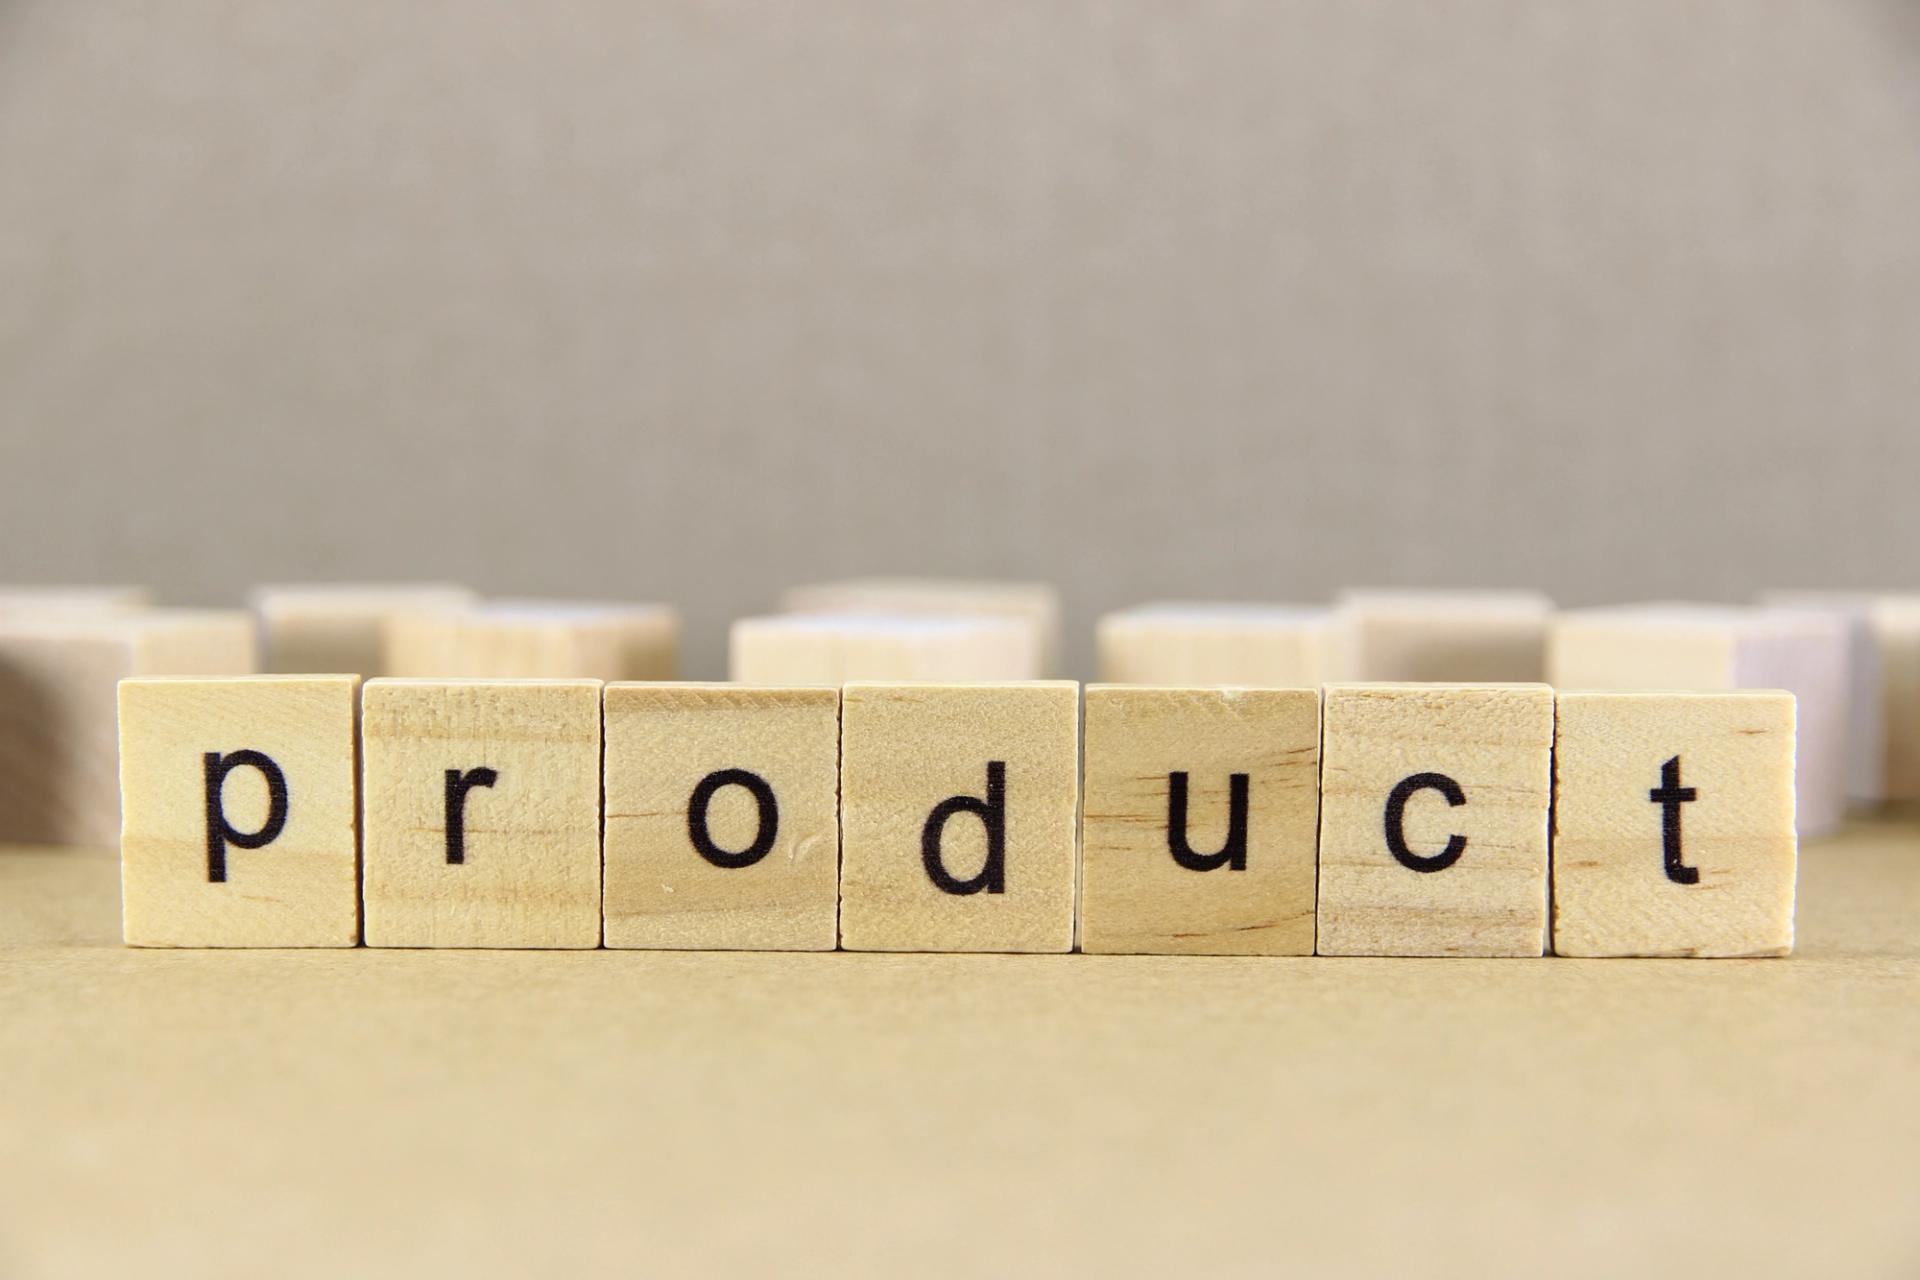 Tech & Product Forum - Do Chief Product Officers have a Product/Market Fit Problem in Europe?